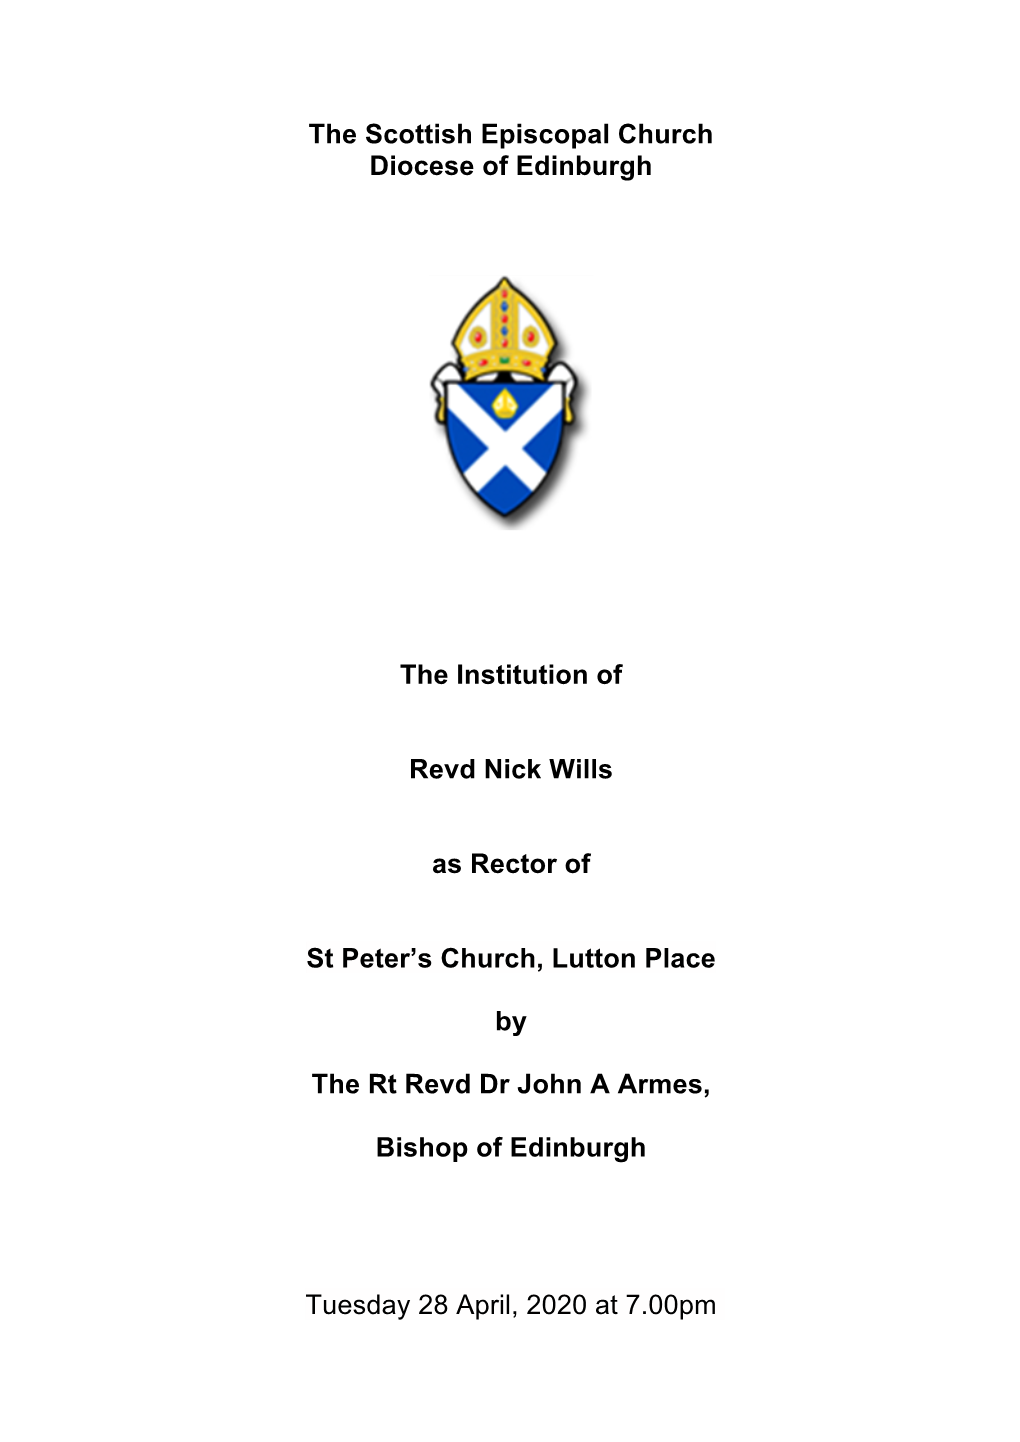 The Scottish Episcopal Church Diocese of Edinburgh The